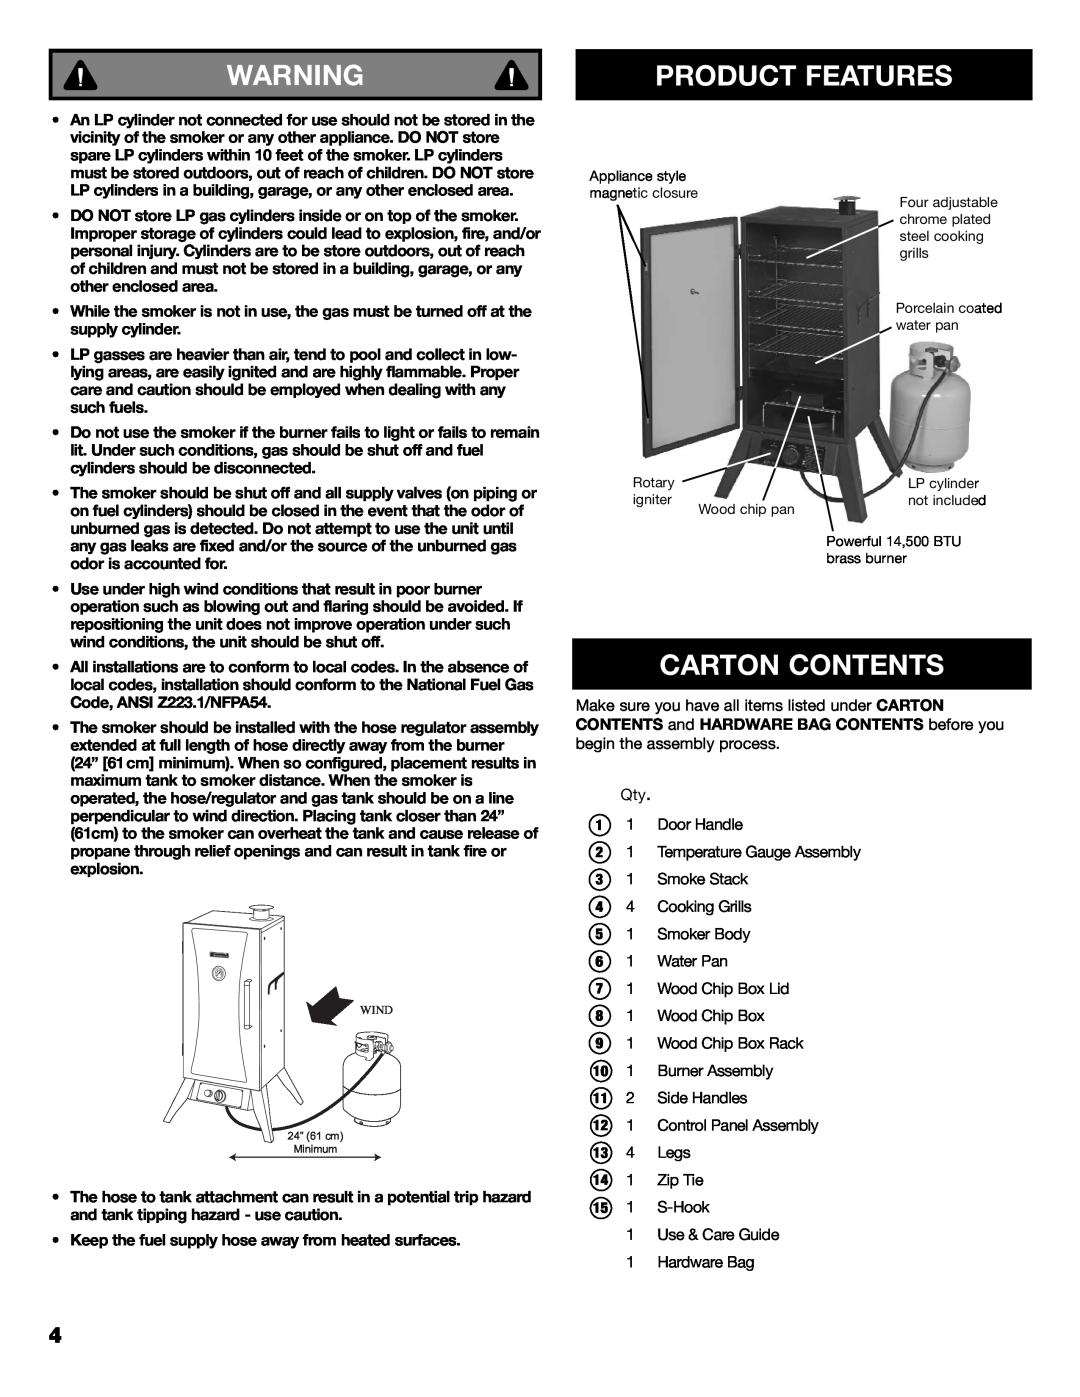 Kenmore 125.15884801 owner manual Product Features, Carton Contents 